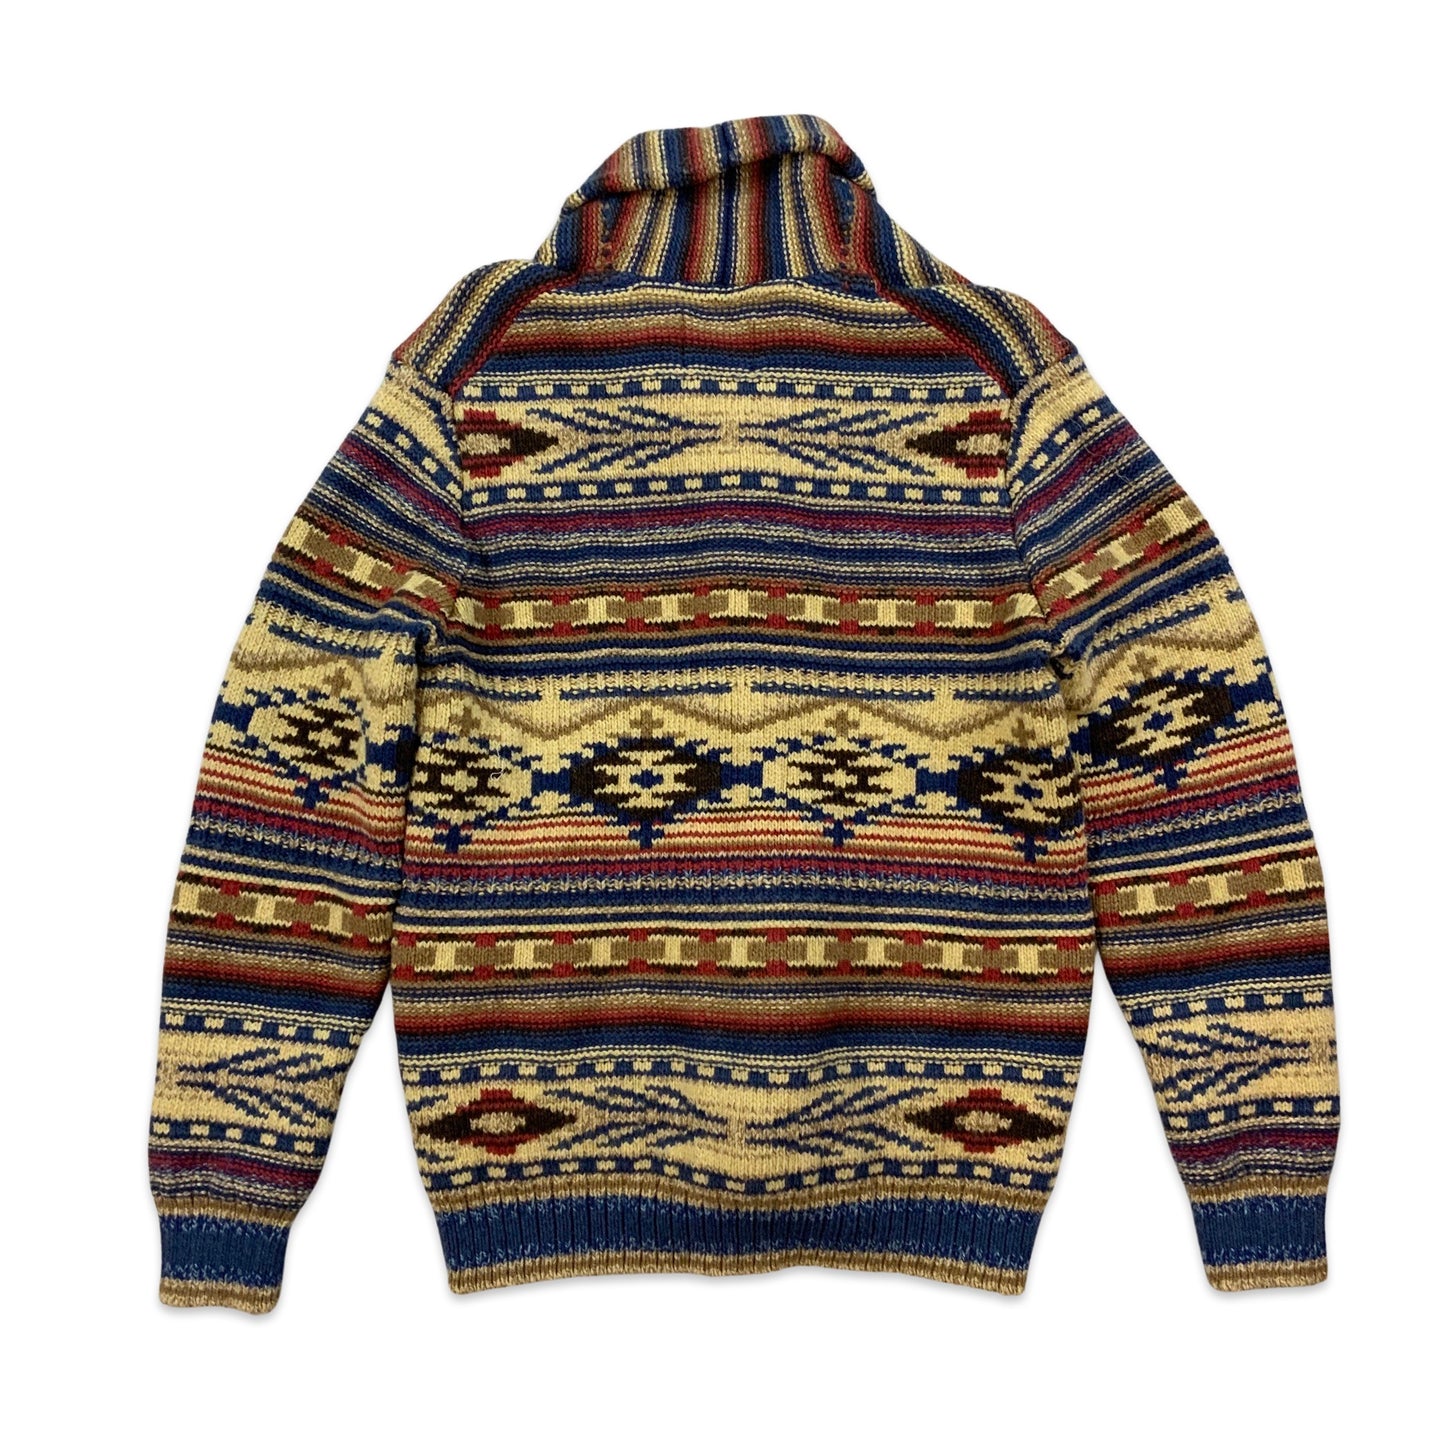 Aztec Knit Red Blue Brown Cardigan S M